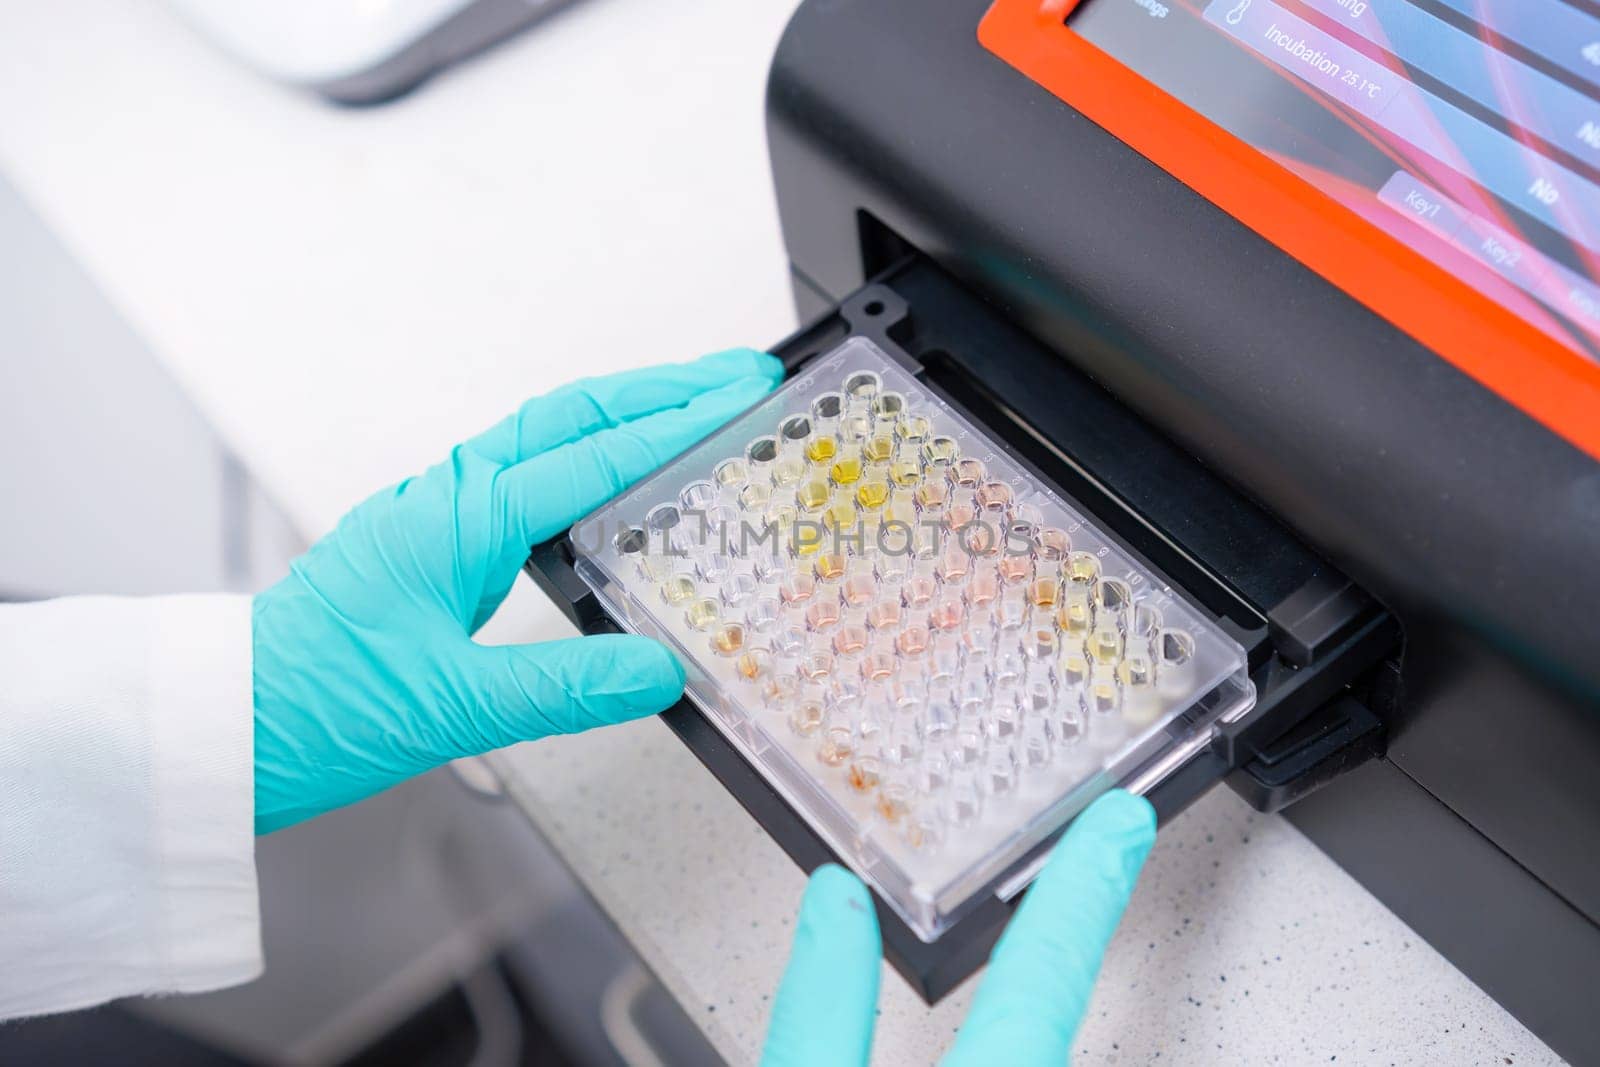 A microplate spectrophotometer is utilized by scientists to analyze DNA samples by inserting a microplate